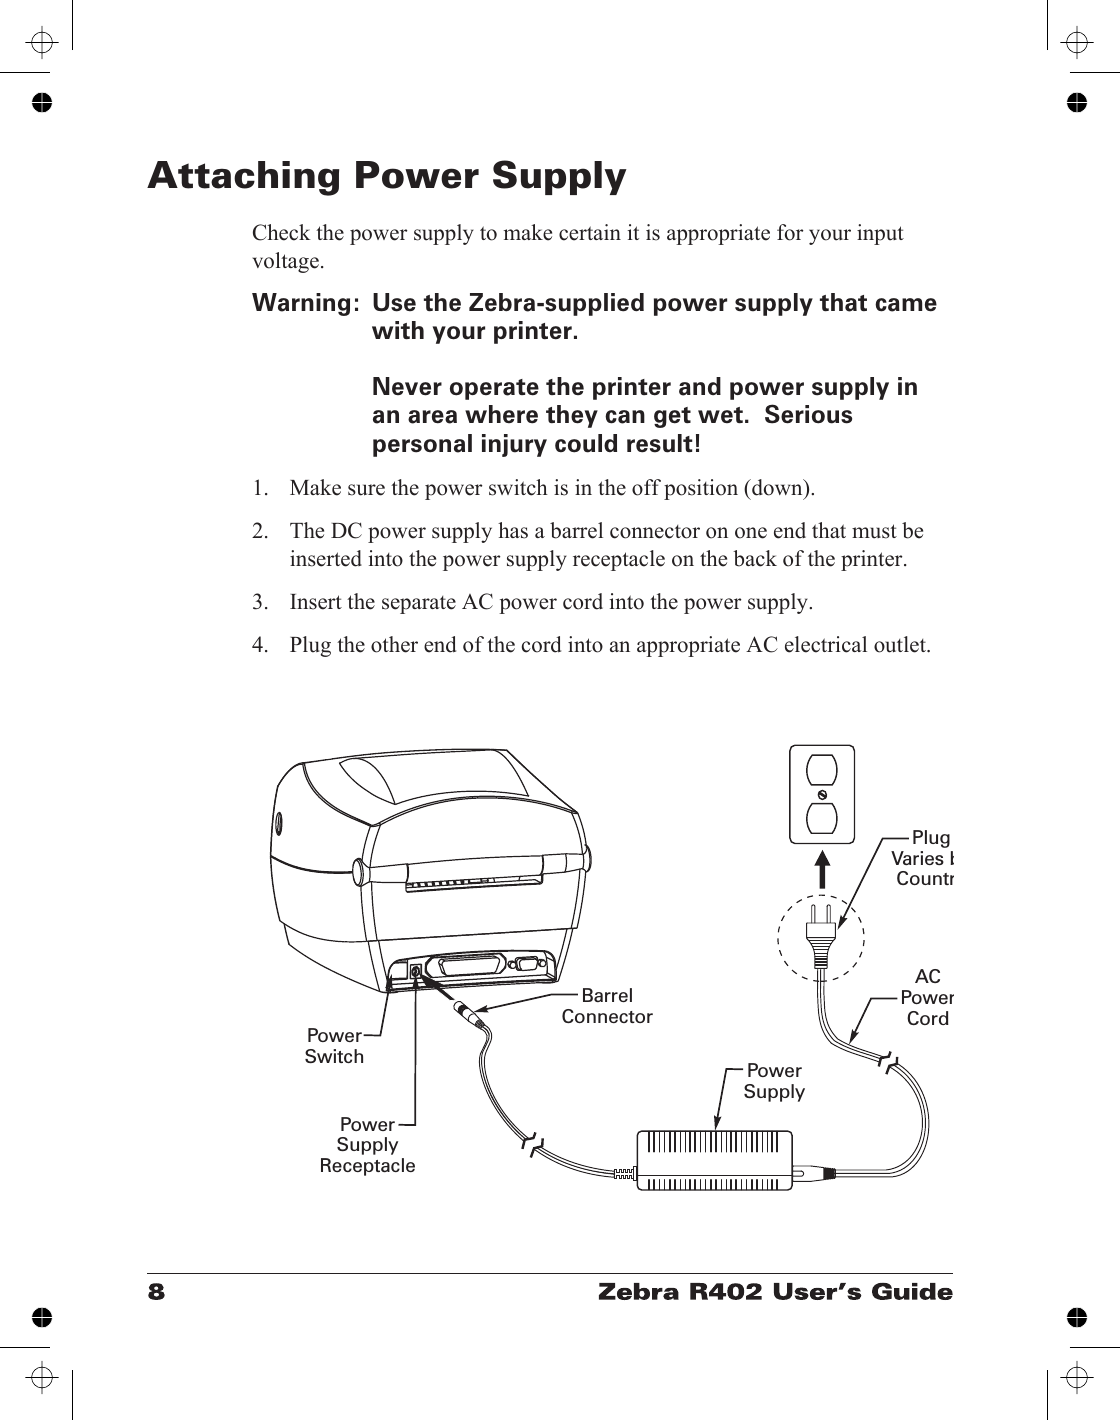 Attaching Power SupplyCheck the power supply to make certain it is appropriate for your inputvoltage.Warning: Use the Zebra-supplied power supply that camewith your printer.Never operate the printer and power supply inan area where they can get wet.  Seriouspersonal injury could result!1. Make sure the power switch is in the off position (down).2. The DC power supply has a barrel connector on one end that must beinserted into the power supply receptacle on the back of the printer.3. Insert the separate AC power cord into the power supply.4. Plug the other end of the cord into an appropriate AC electrical outlet.PlugVaries bCountrACPowerCordPowerSupplyPowerSwitchPowerSupplyReceptacleBarrelConnector